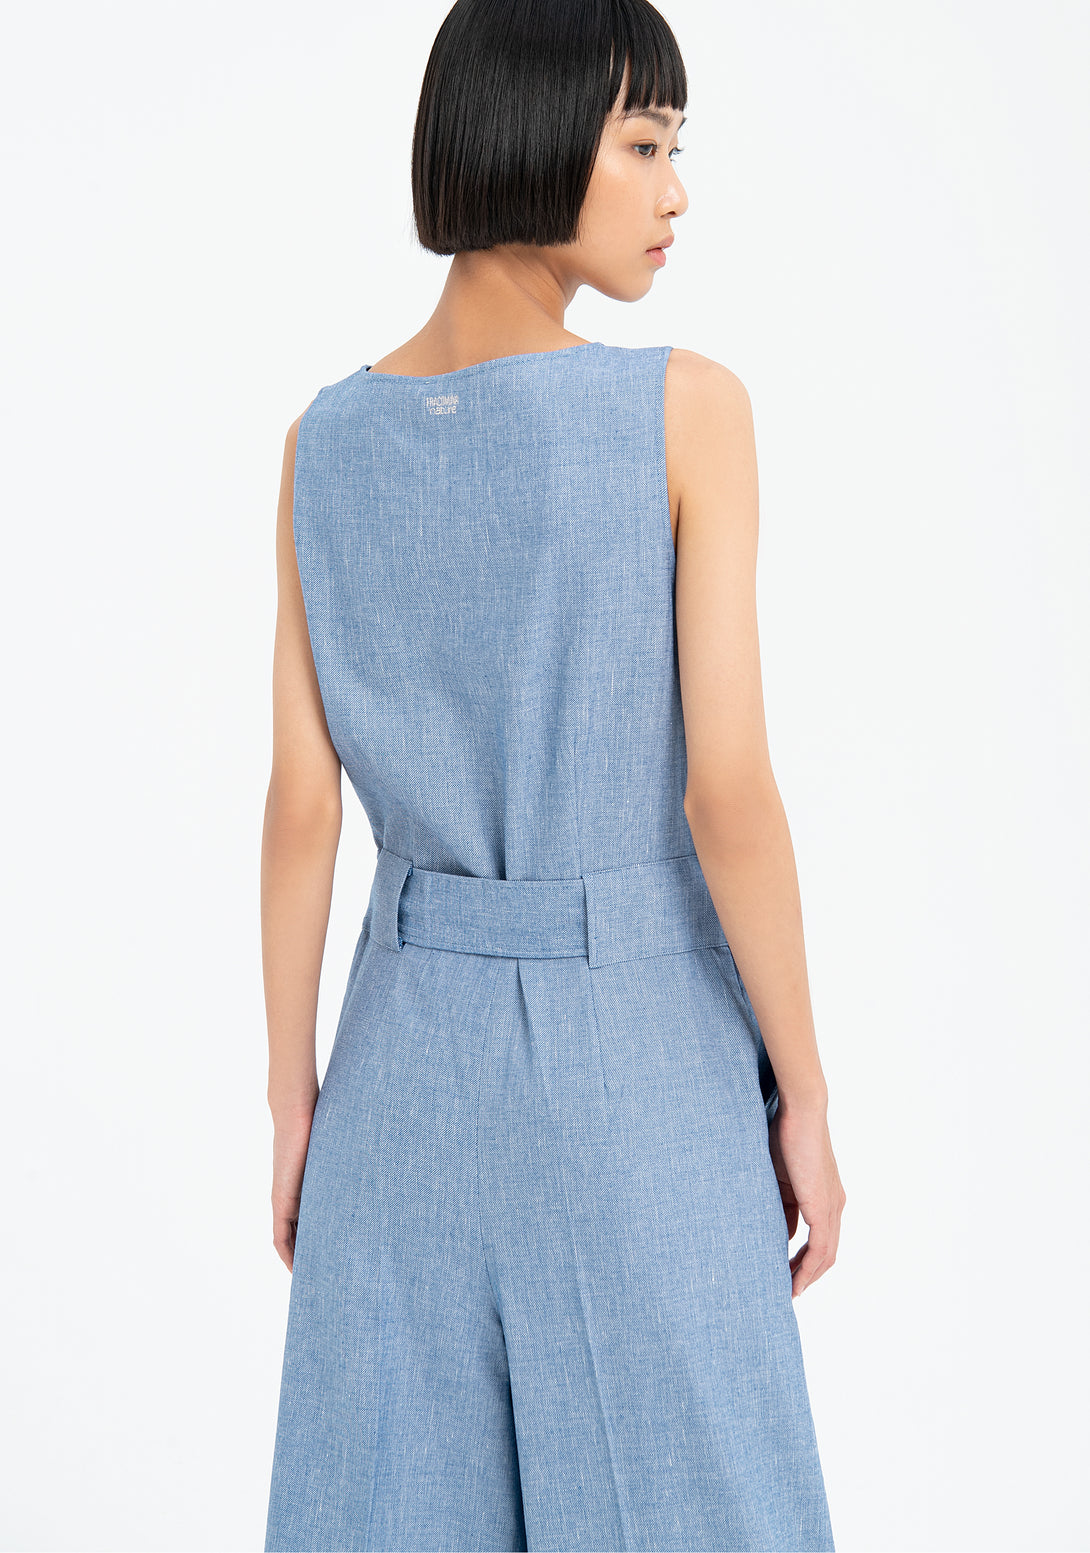 Jumpsuit wide fit with no sleeves made in denim